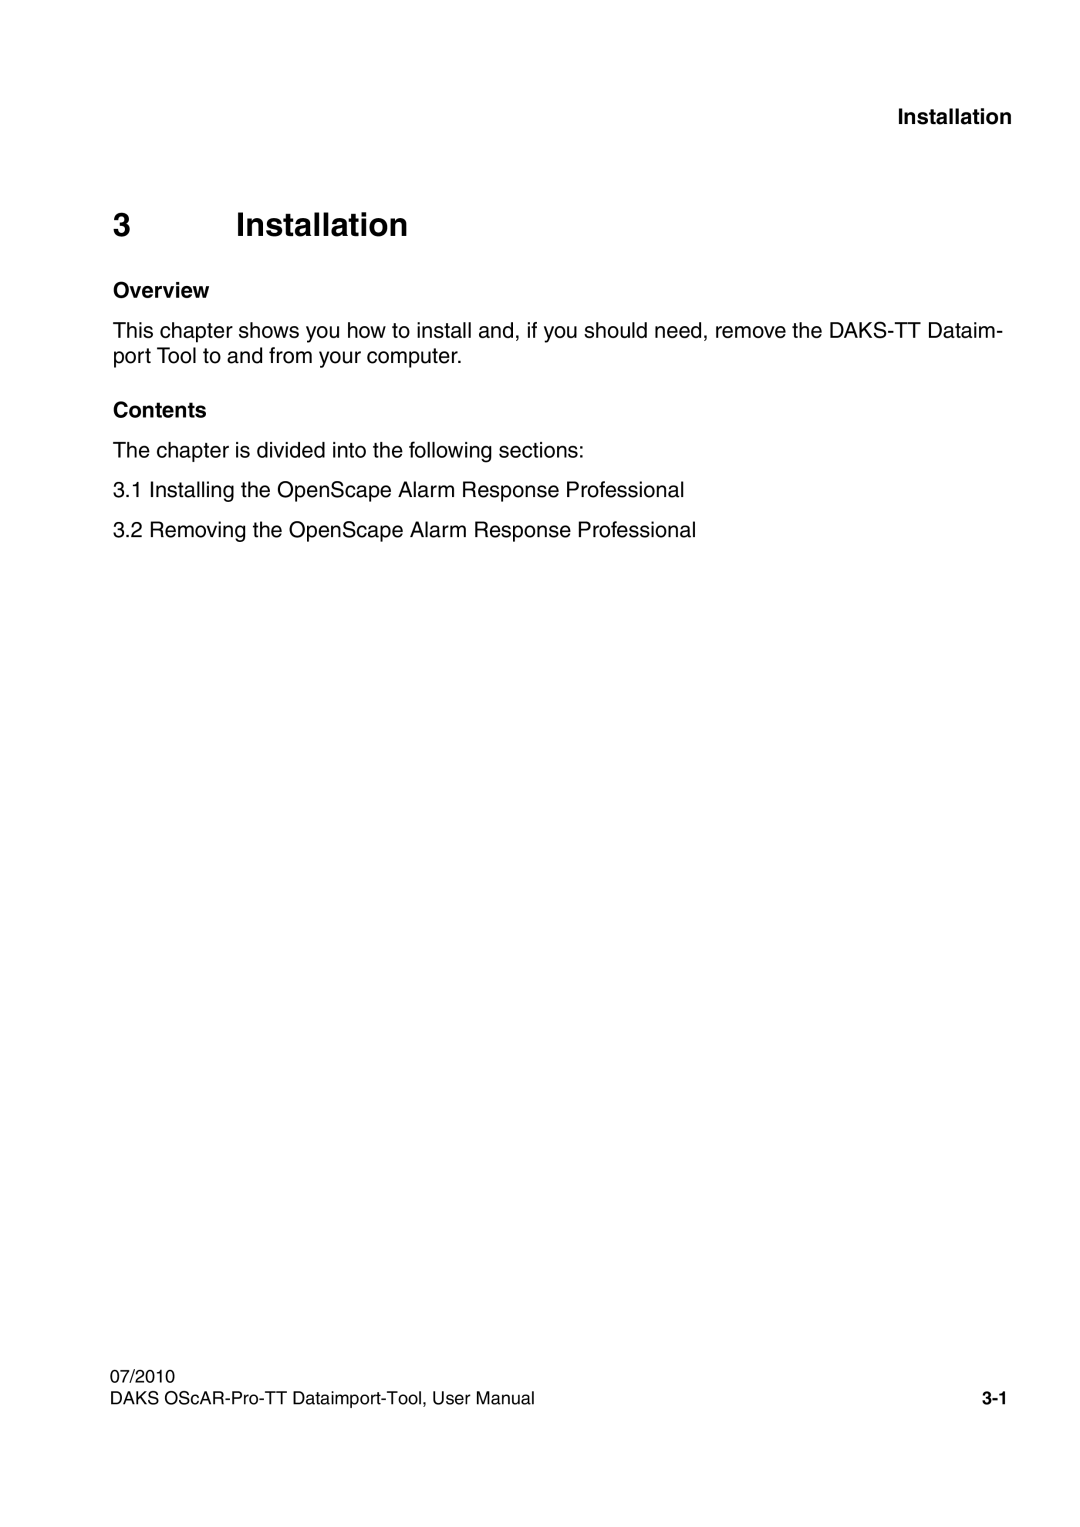 Siemens A31003-S1730-U102-1-7619 user manual Installation, Overview, Contents 